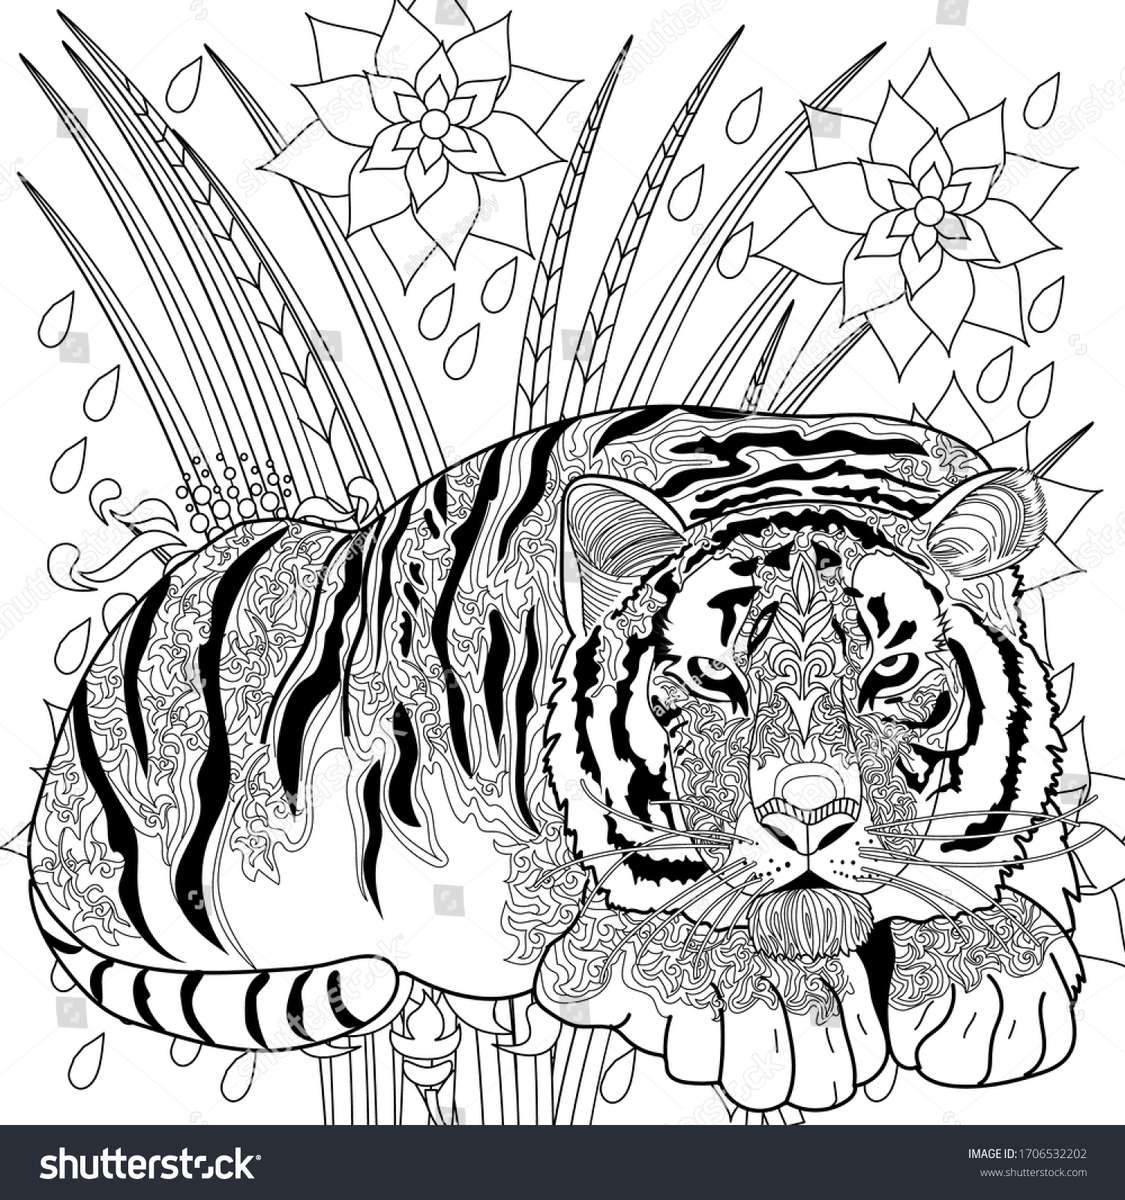 Tiger image puzzle online from photo